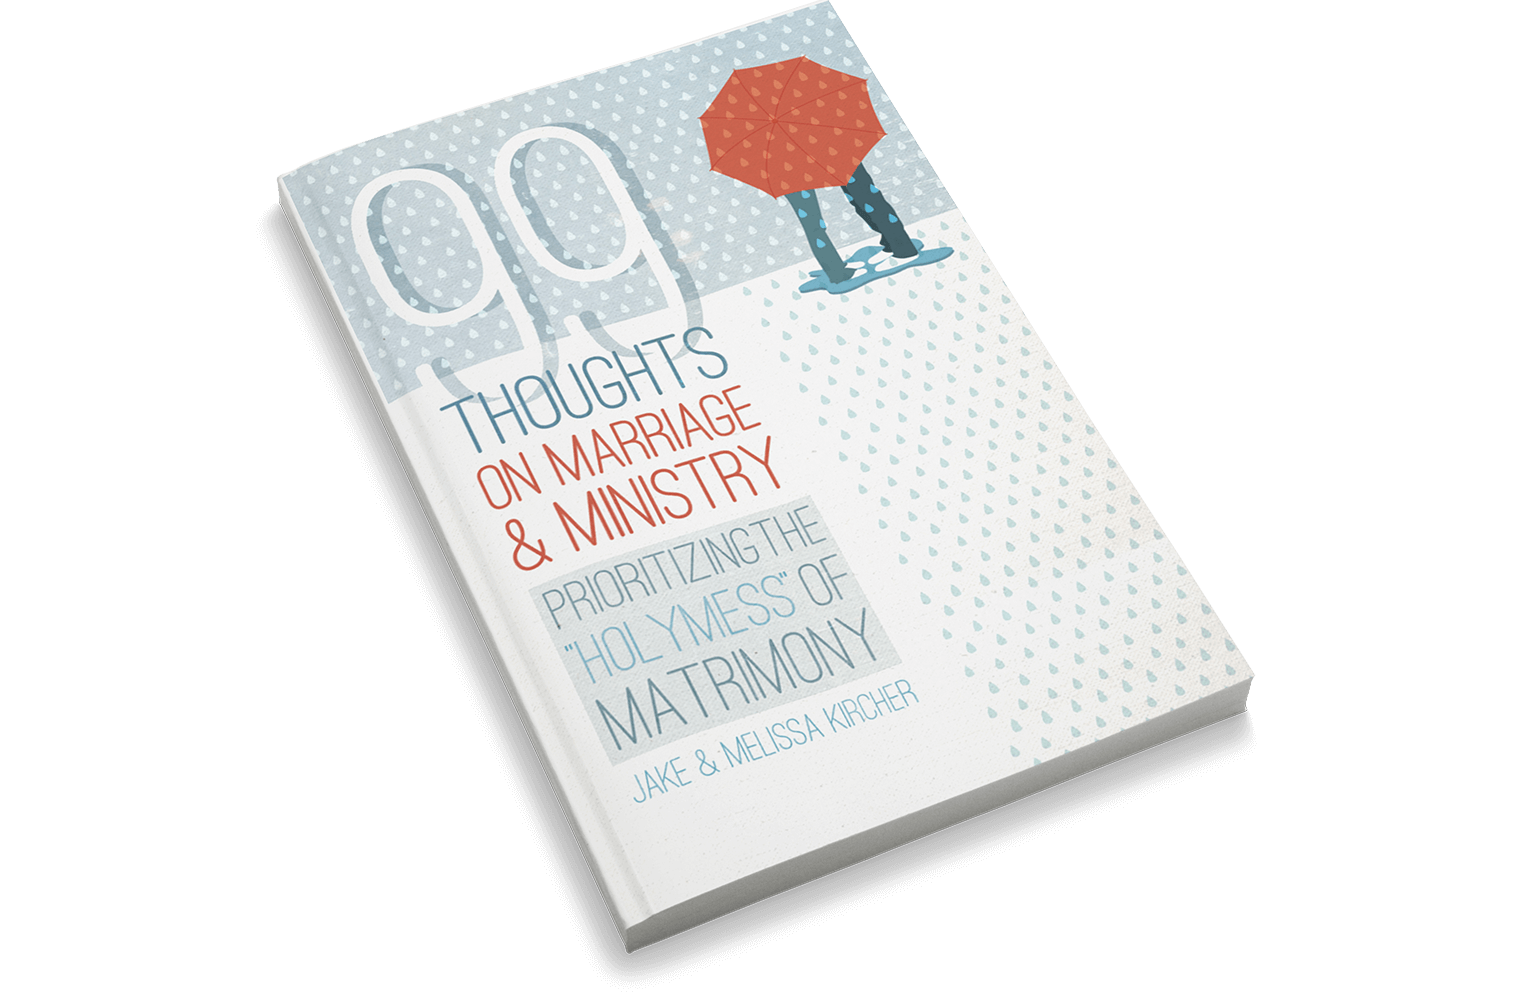 99 Thoughts On Marriage & Ministry